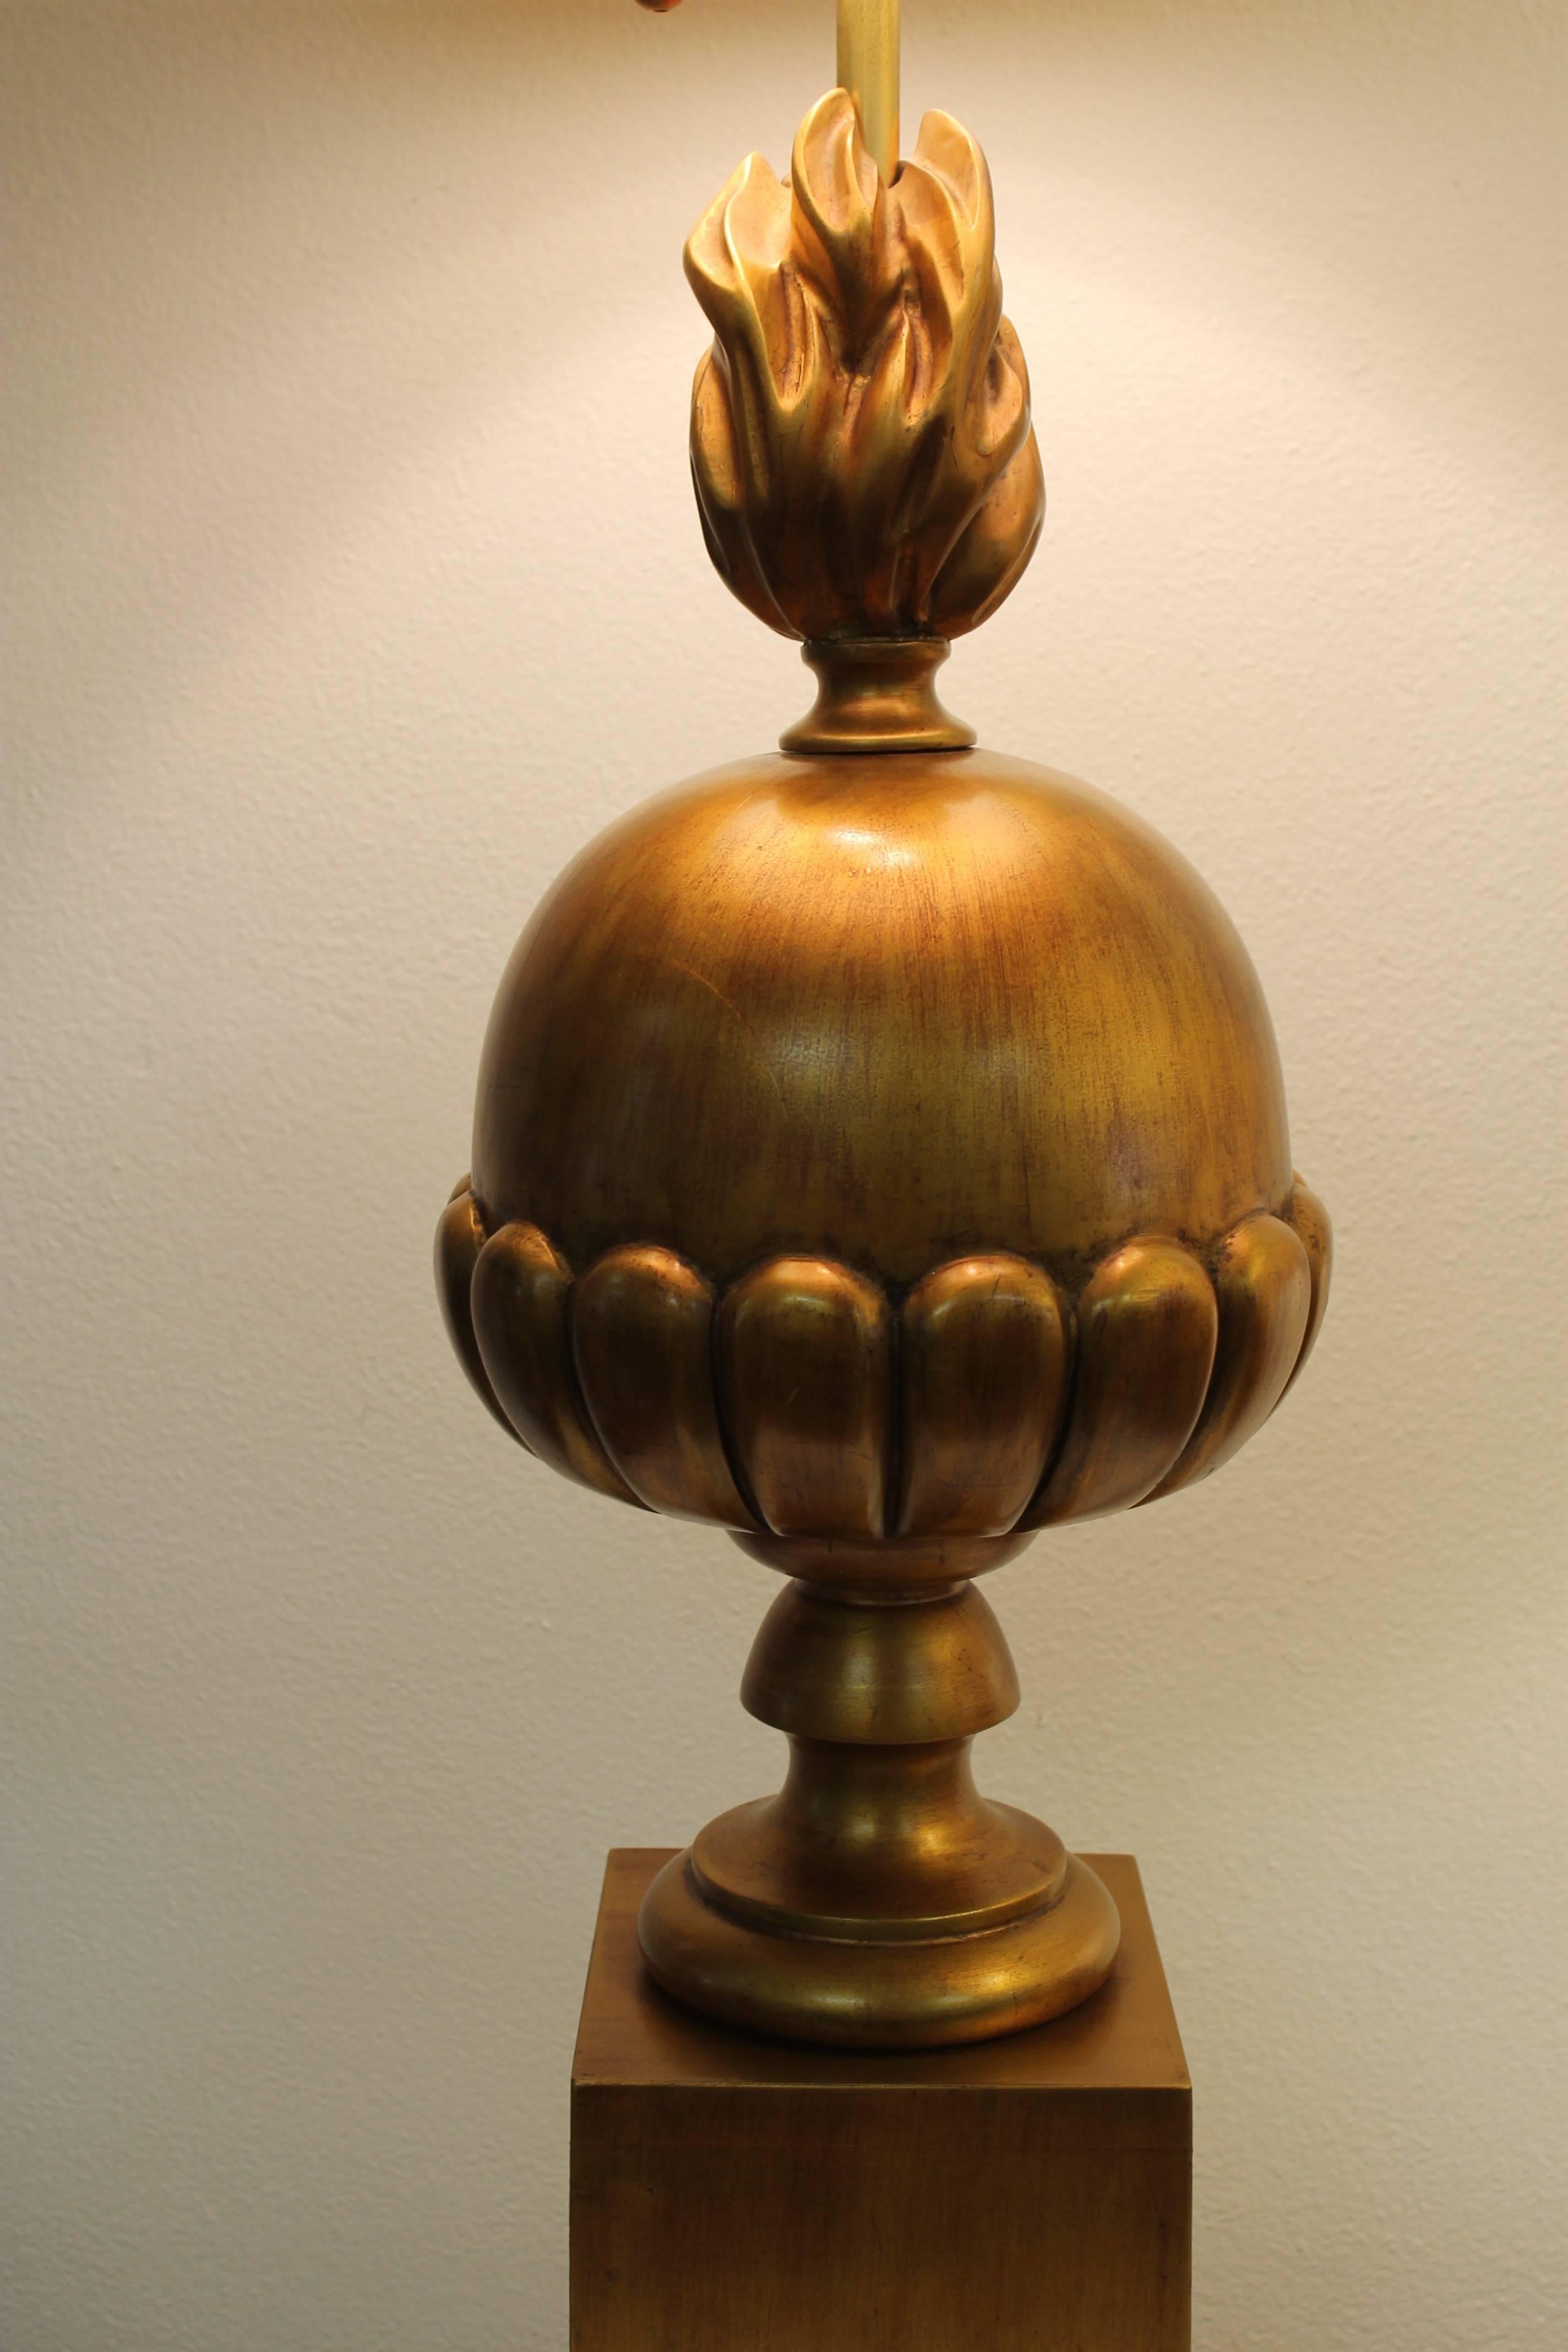 An original lamp by The Marbro Lamp Company. Most likely an homage to the statue of liberty. Top portion has flames. Measure: Total height is 58.5